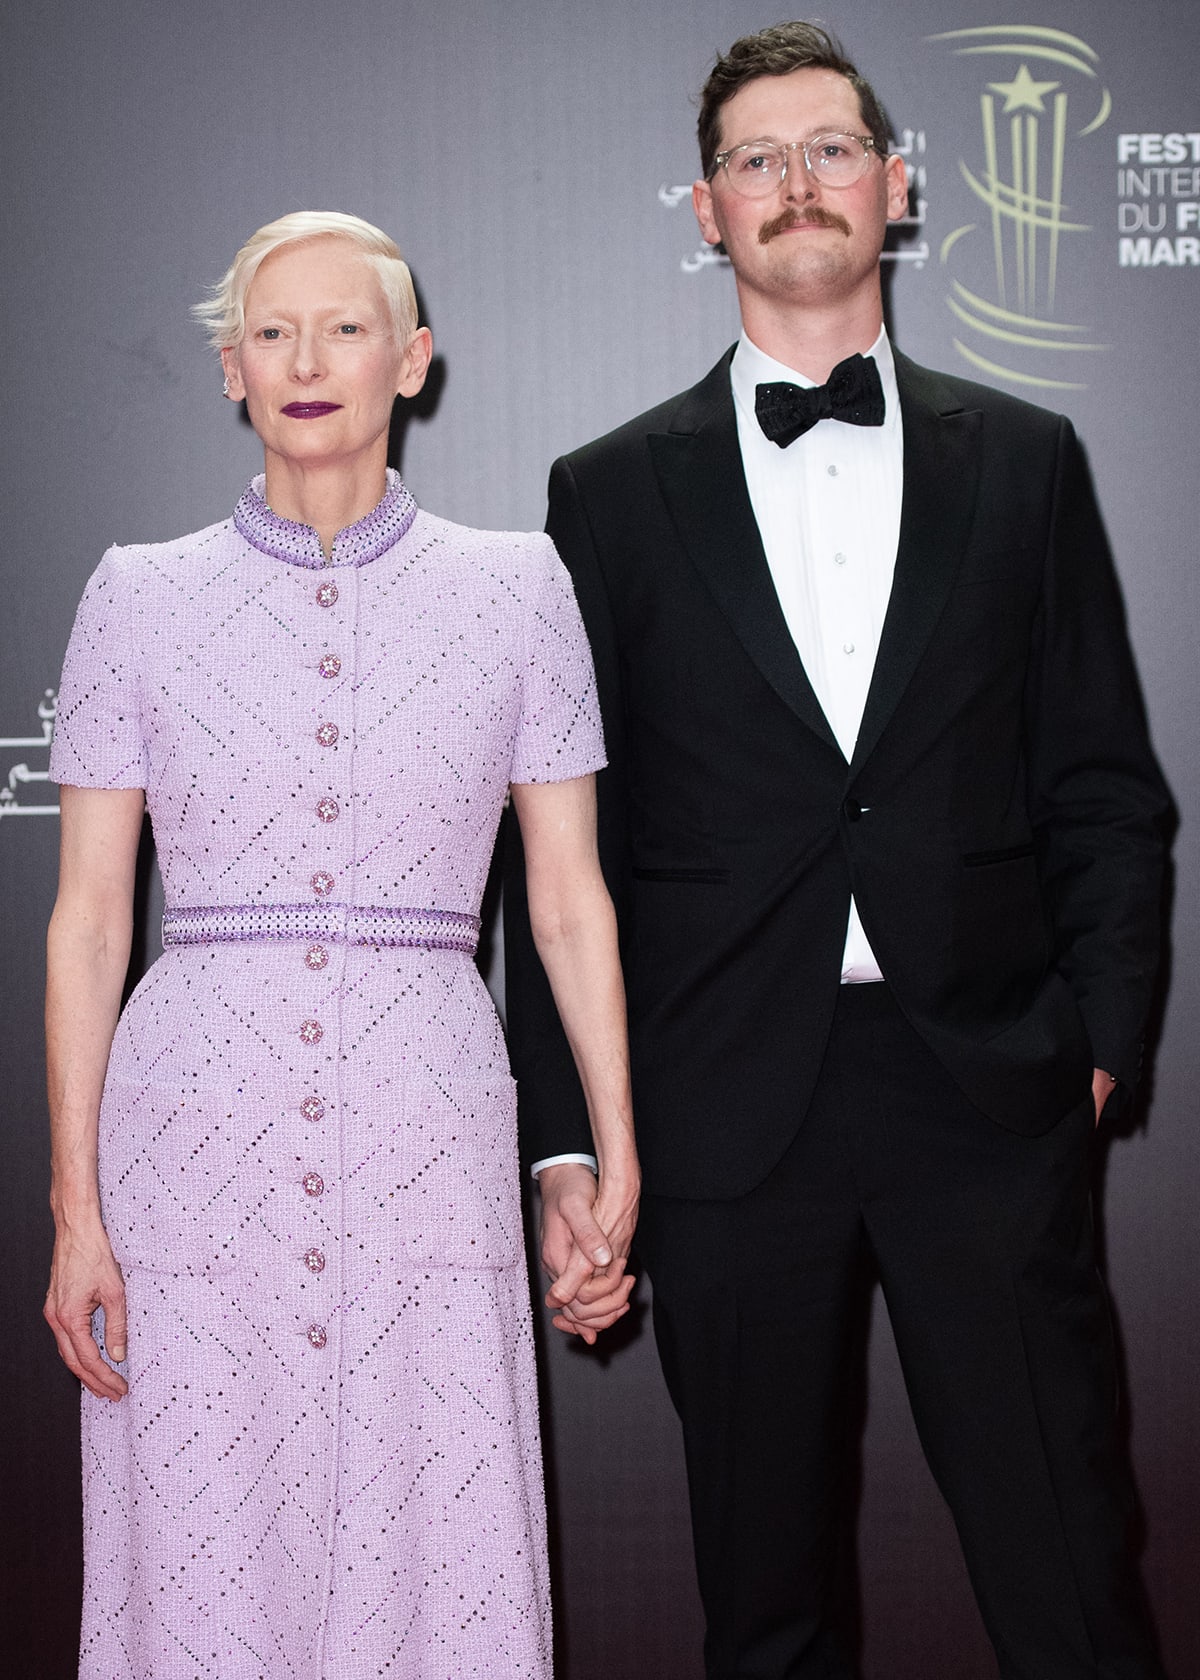 Tilda Swinton and son Xavier Swinton Byrne hold hands while posing on the red carpet at the 20th Marrakech International Film Festival held at Palais des Congrès in Marrakech, Morocco on November 24, 2023